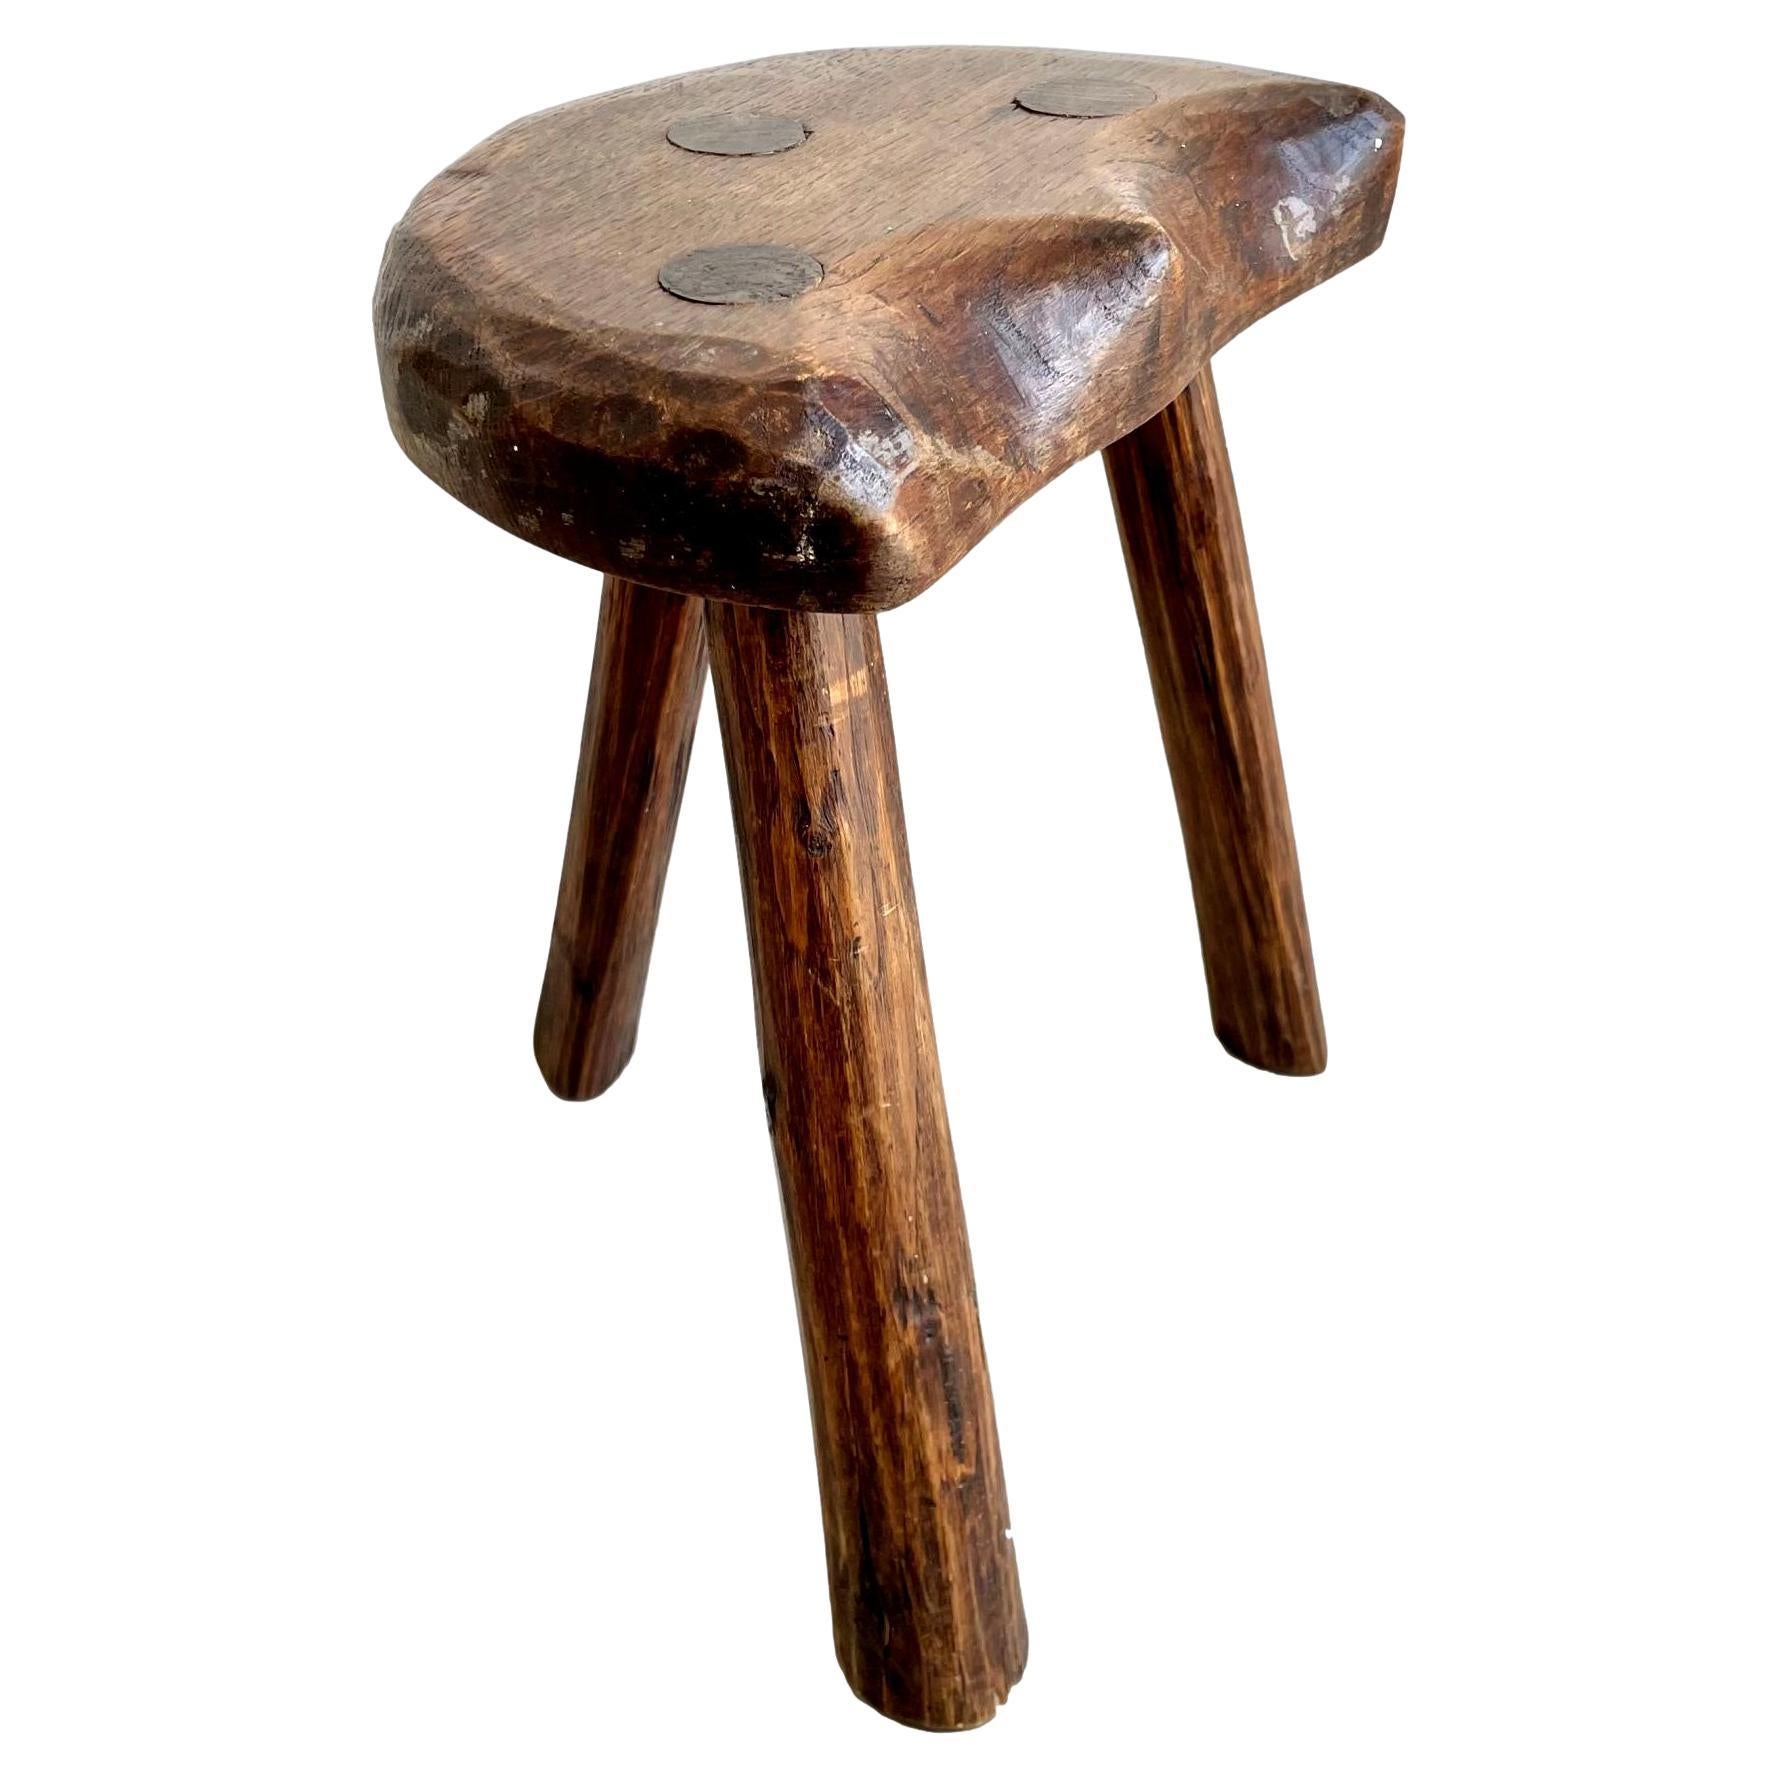 Brutalist wooden tripod stool made in France, circa 1950s. Substantial and chunky seat with sturdy legs. This stool has an impressive crescent moon shaped seat with great character and lines. Darkened patina and grain to the wood. Perfect for books